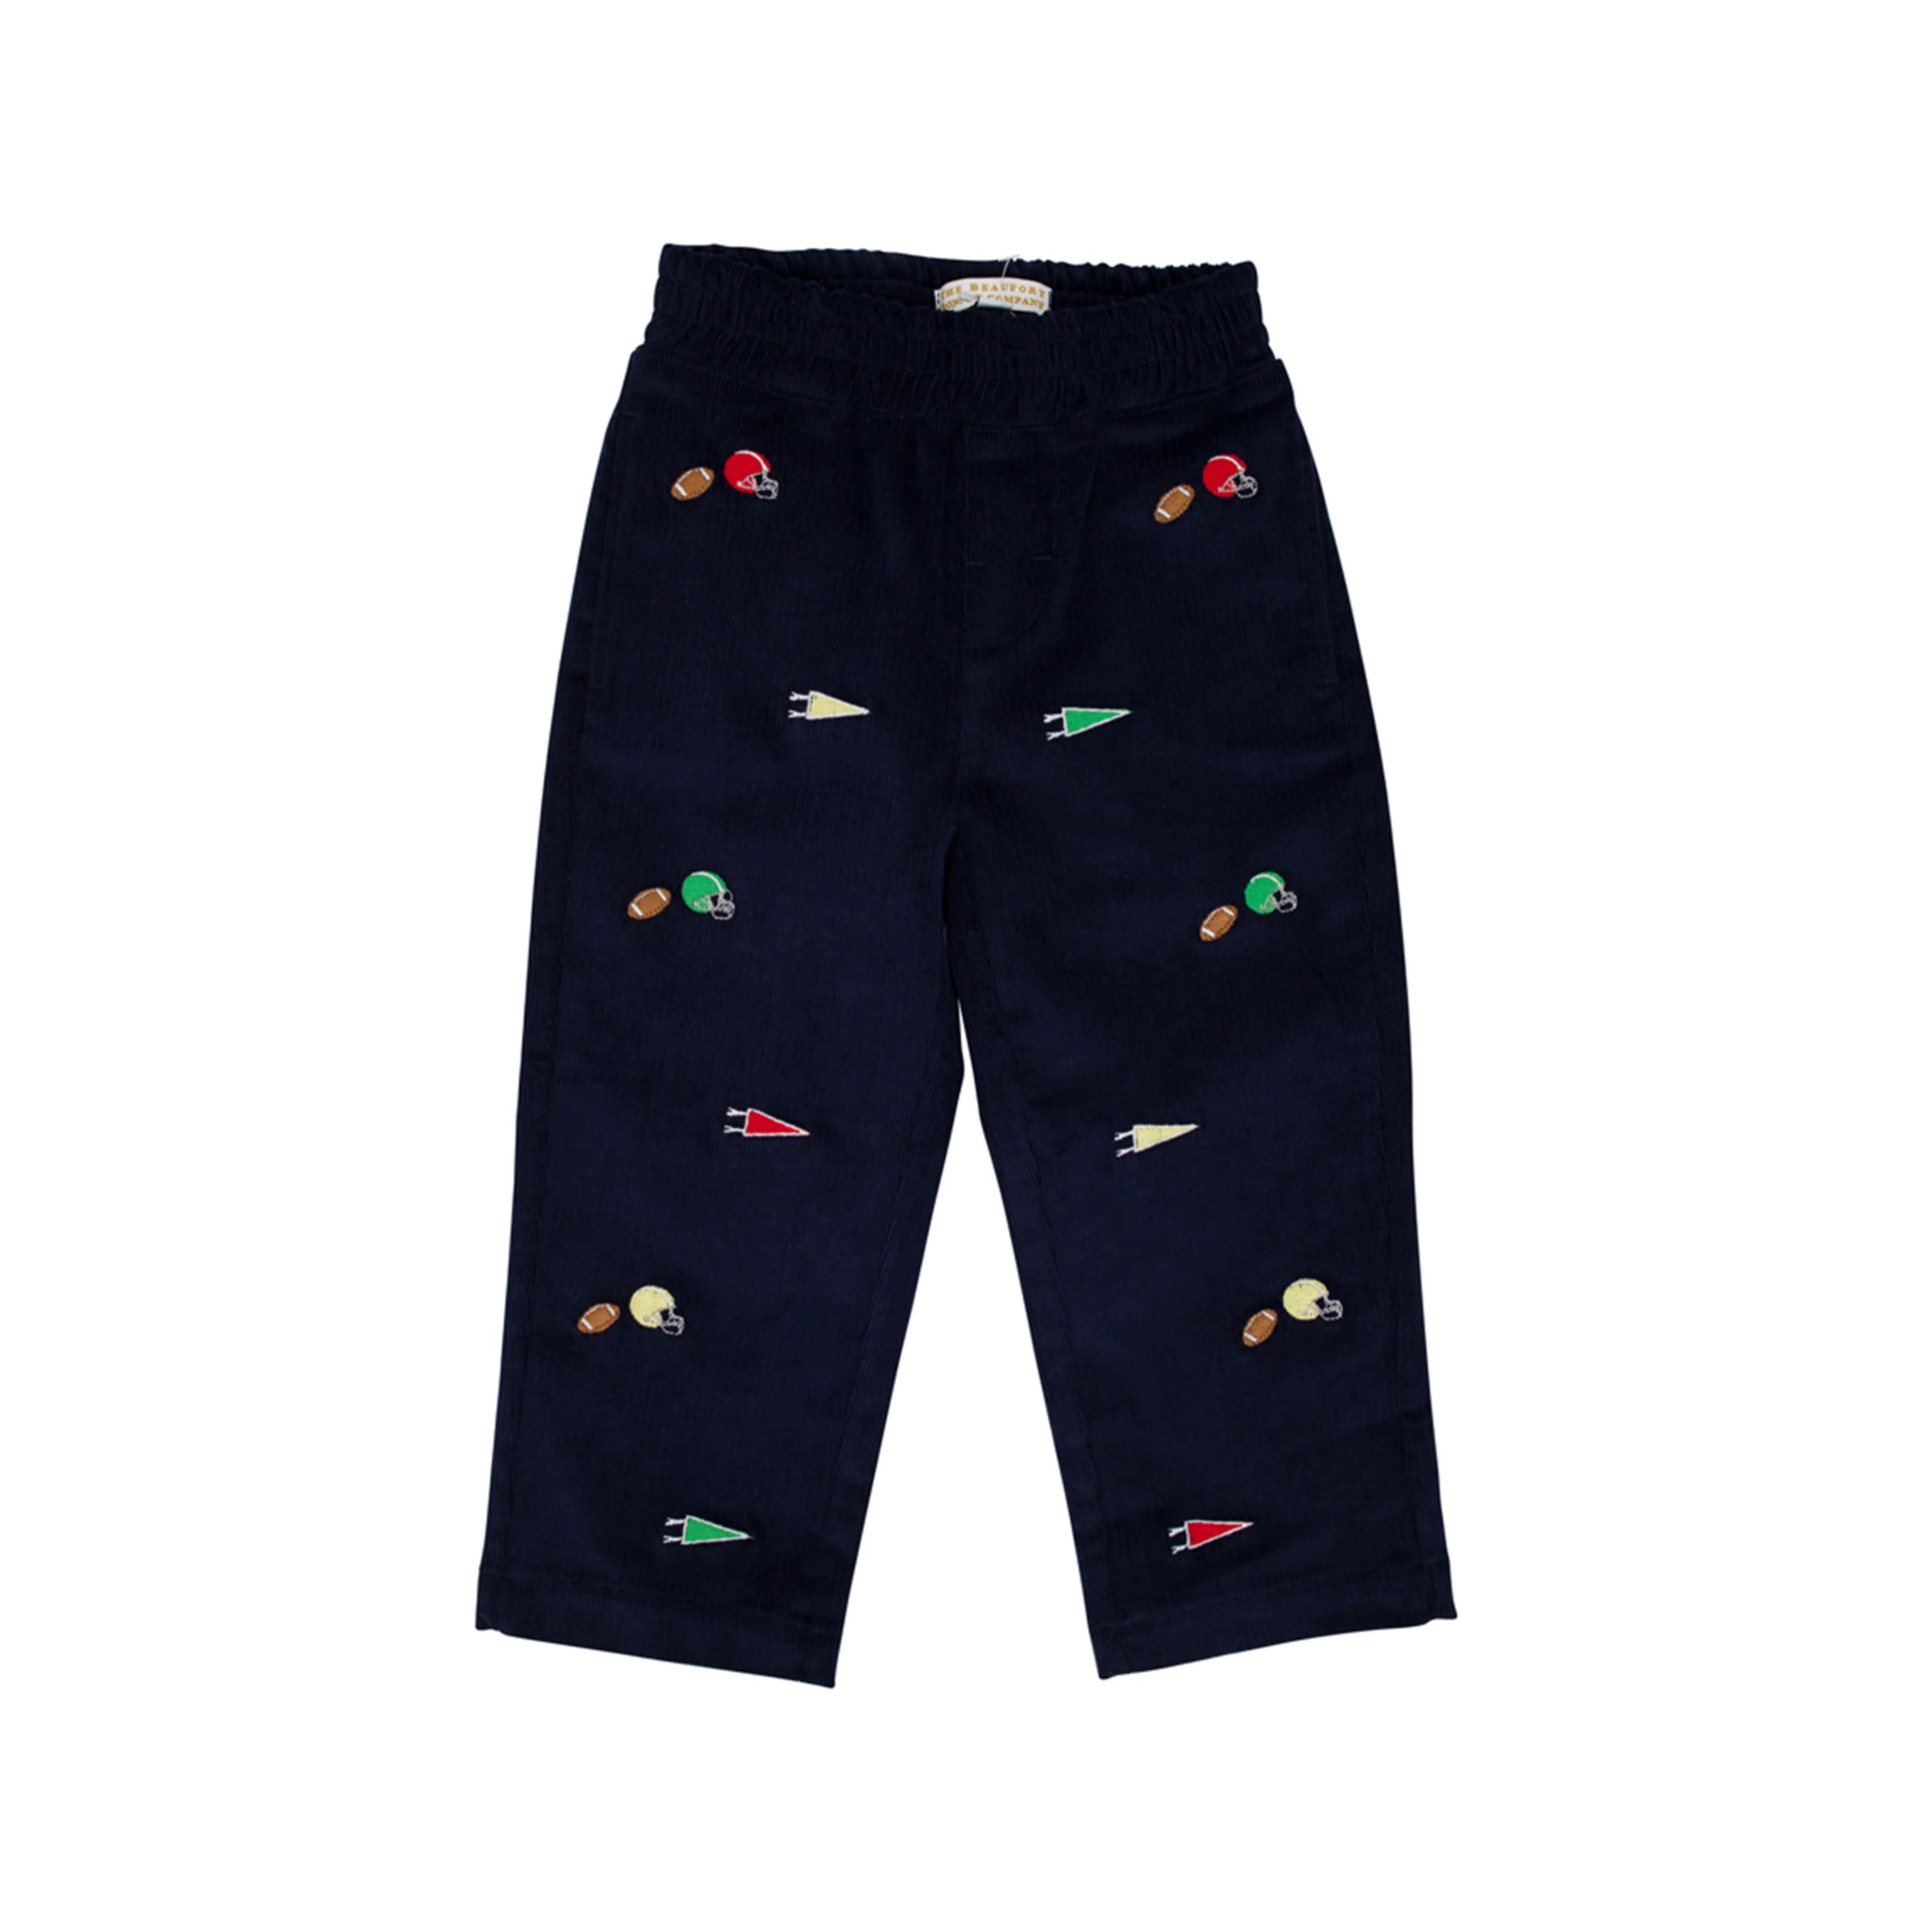 Critter Sheffield Pants (Corduroy) - Nantucket Navy with Football Embroidery | The Beaufort Bonnet Company